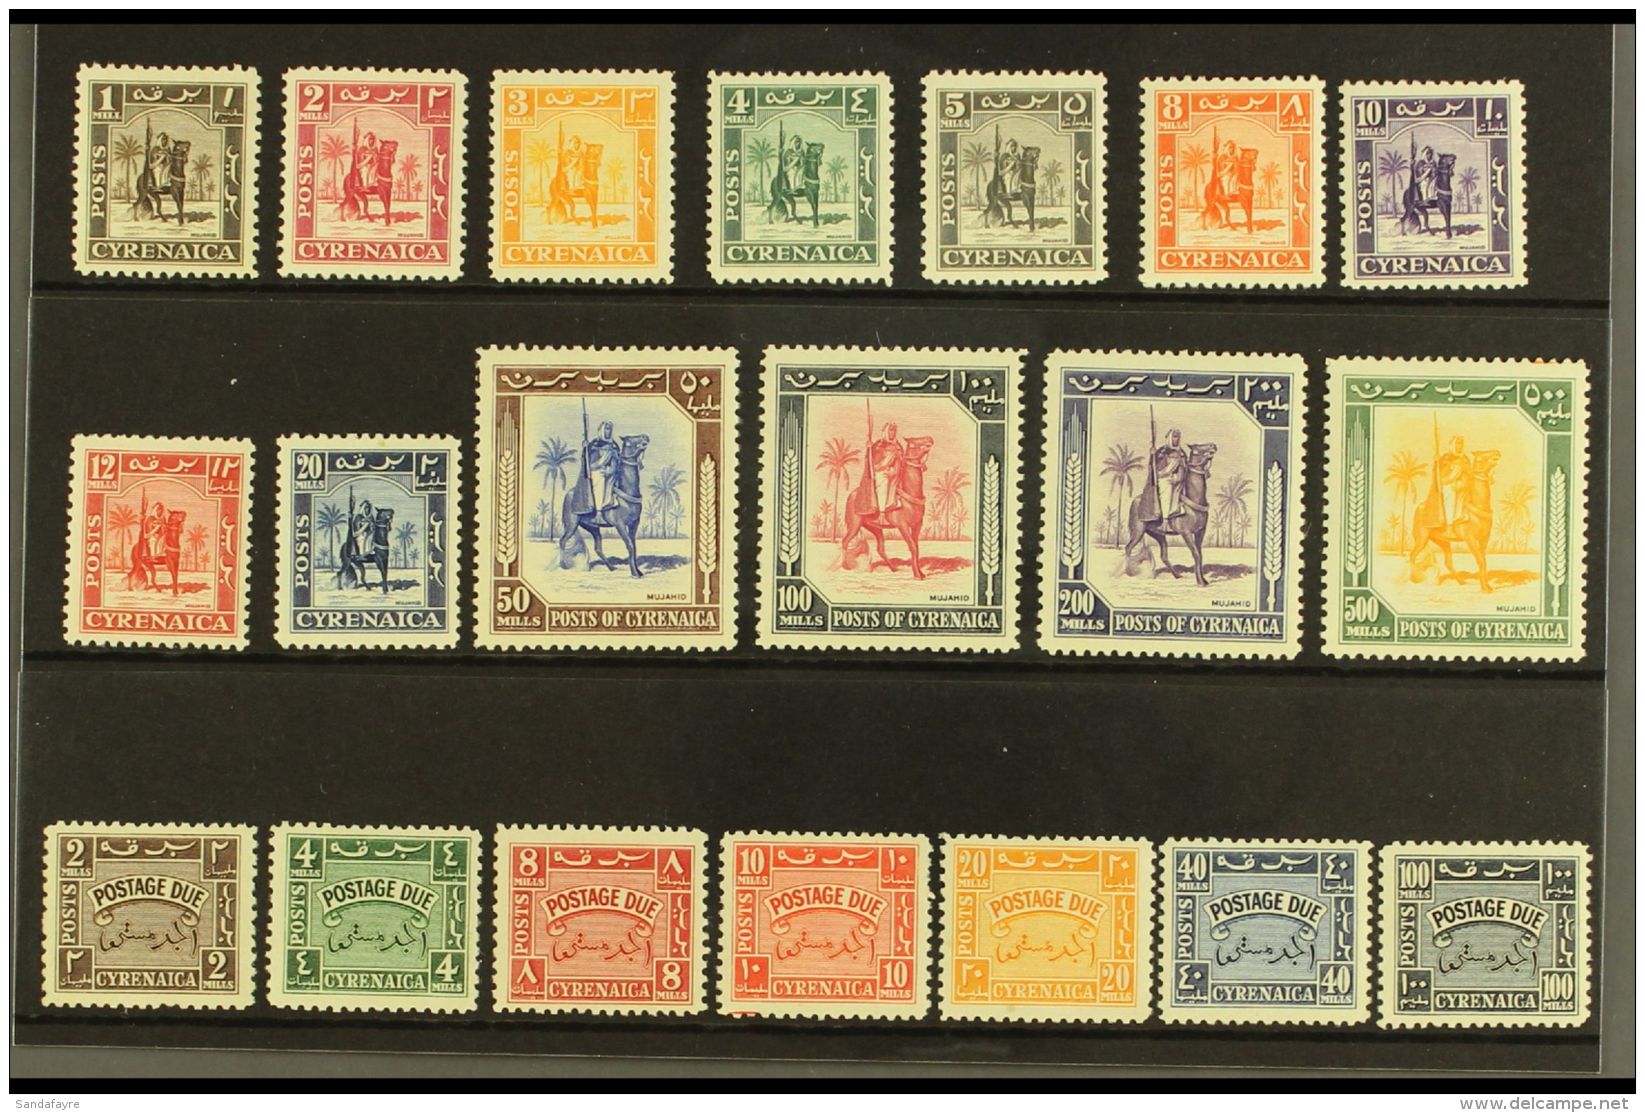 CYRENAICA 1950 Complete Issue Including Horseman Set And Postage Dues, SG 136/48, D149/155, Very Fine And Fresh... - Italiaans Oost-Afrika